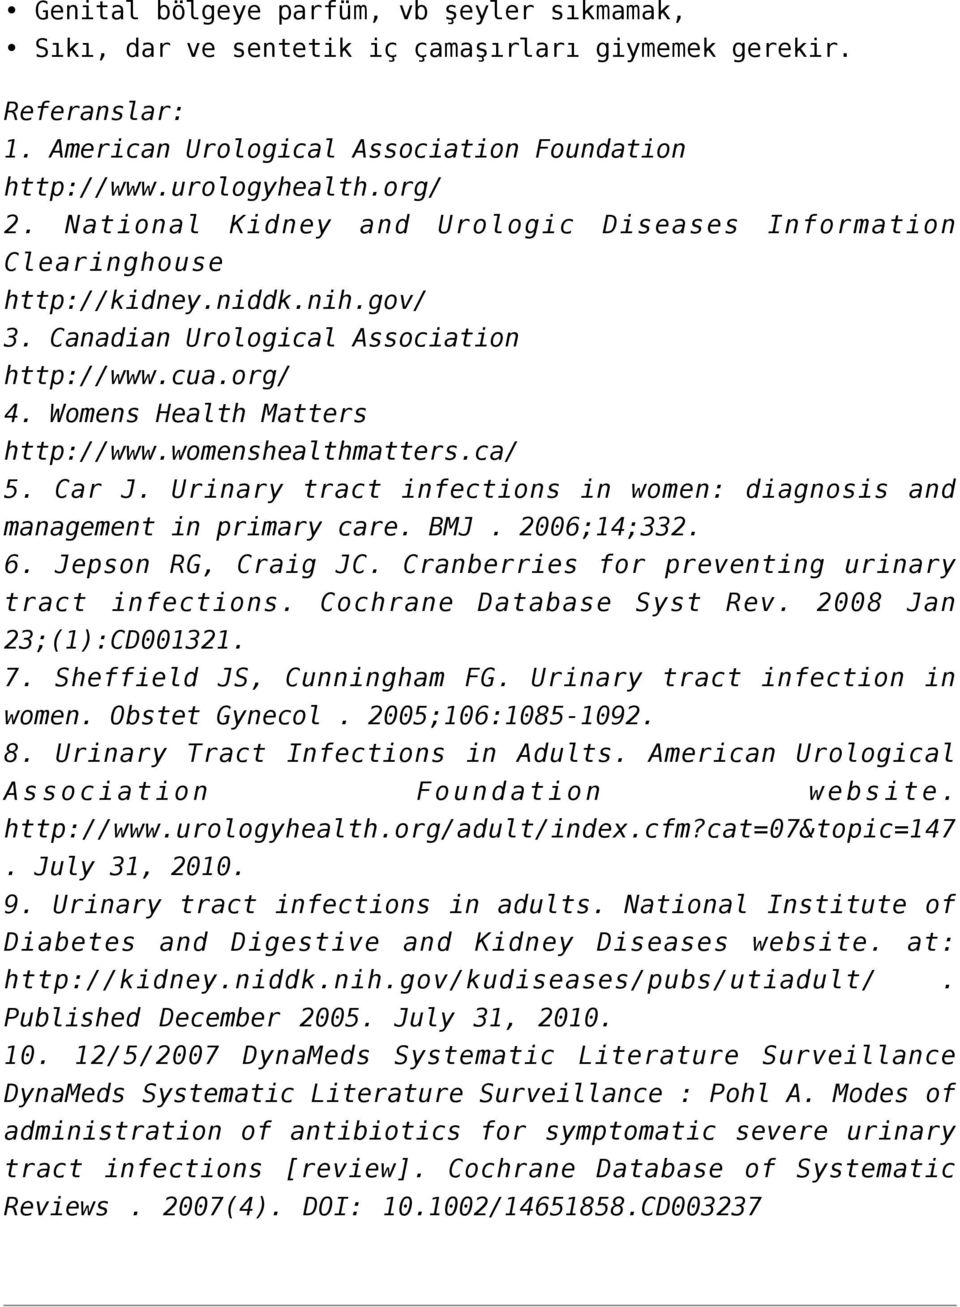 womenshealthmatters.ca/ 5. Car J. Urinary tract infections in women: diagnosis and management in primary care. BMJ. 2006;14;332. 6. Jepson RG, Craig JC.